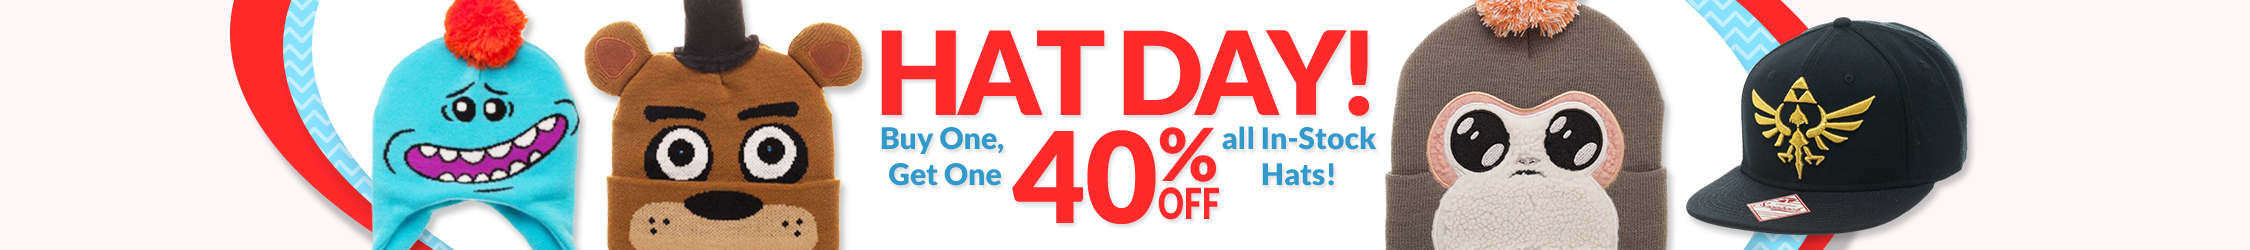 Hat Day! Buy One, Get One 40% Off all In-Stock Hats